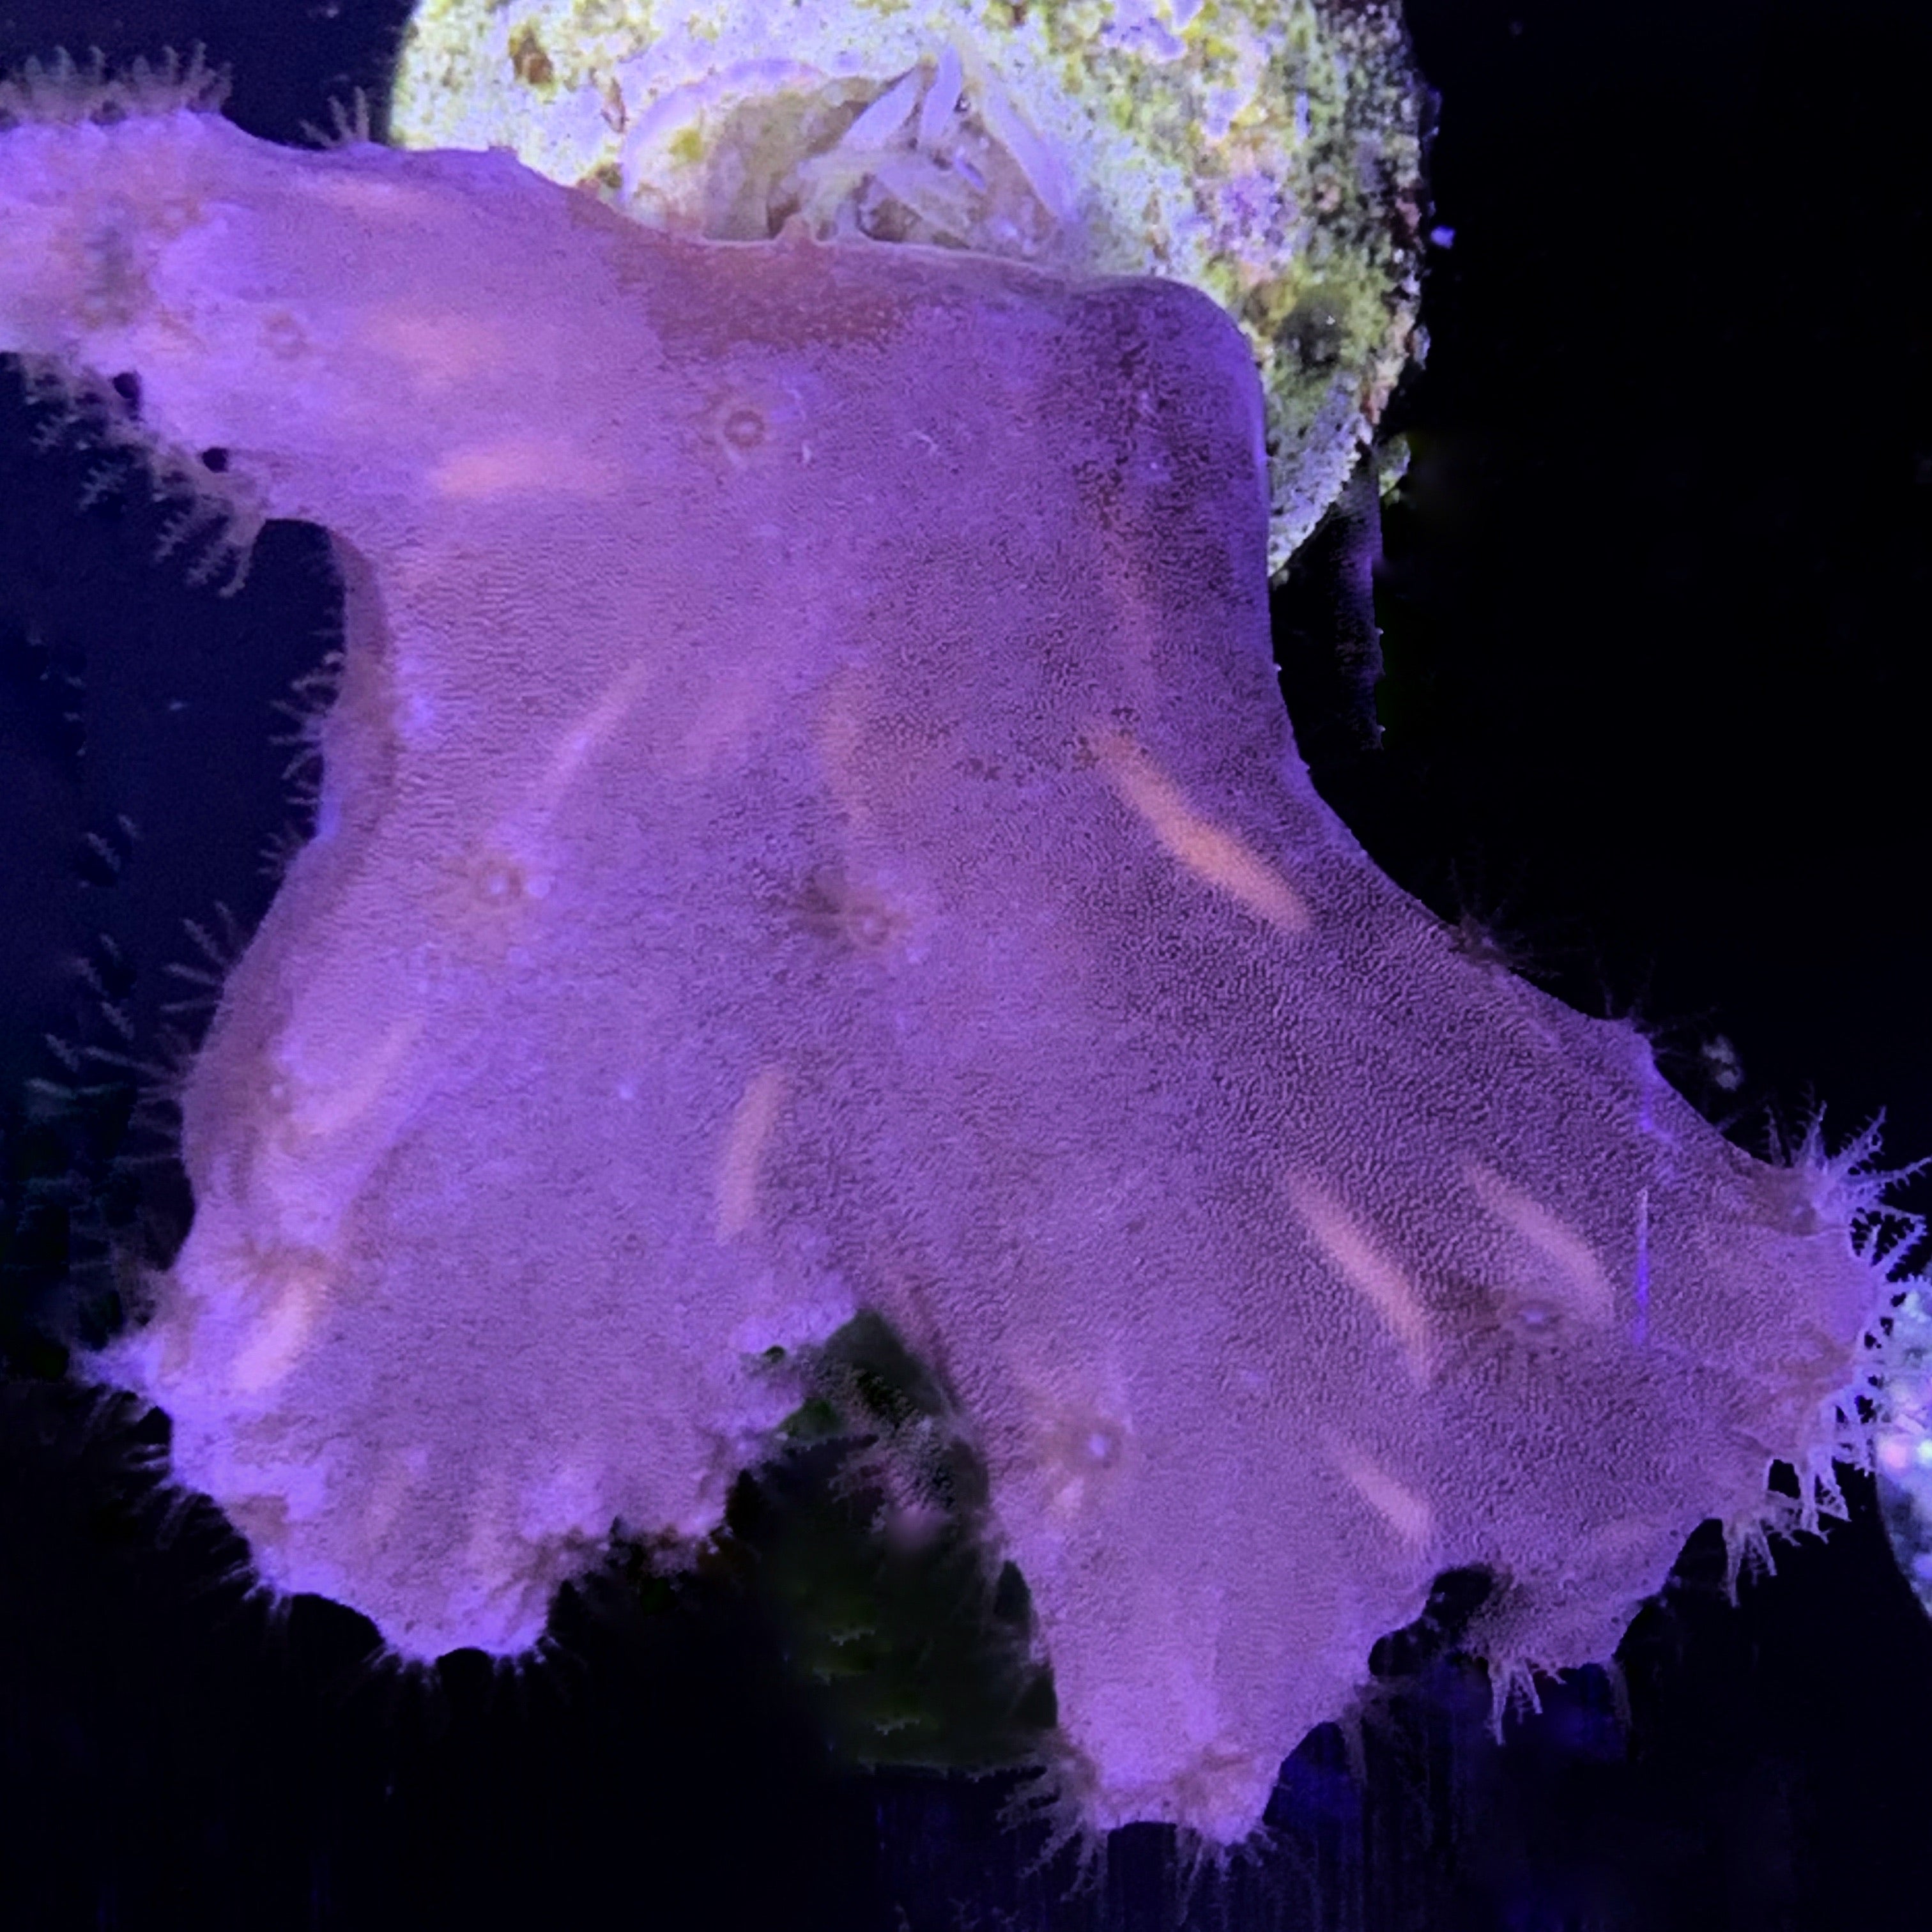 Cabbage Coral